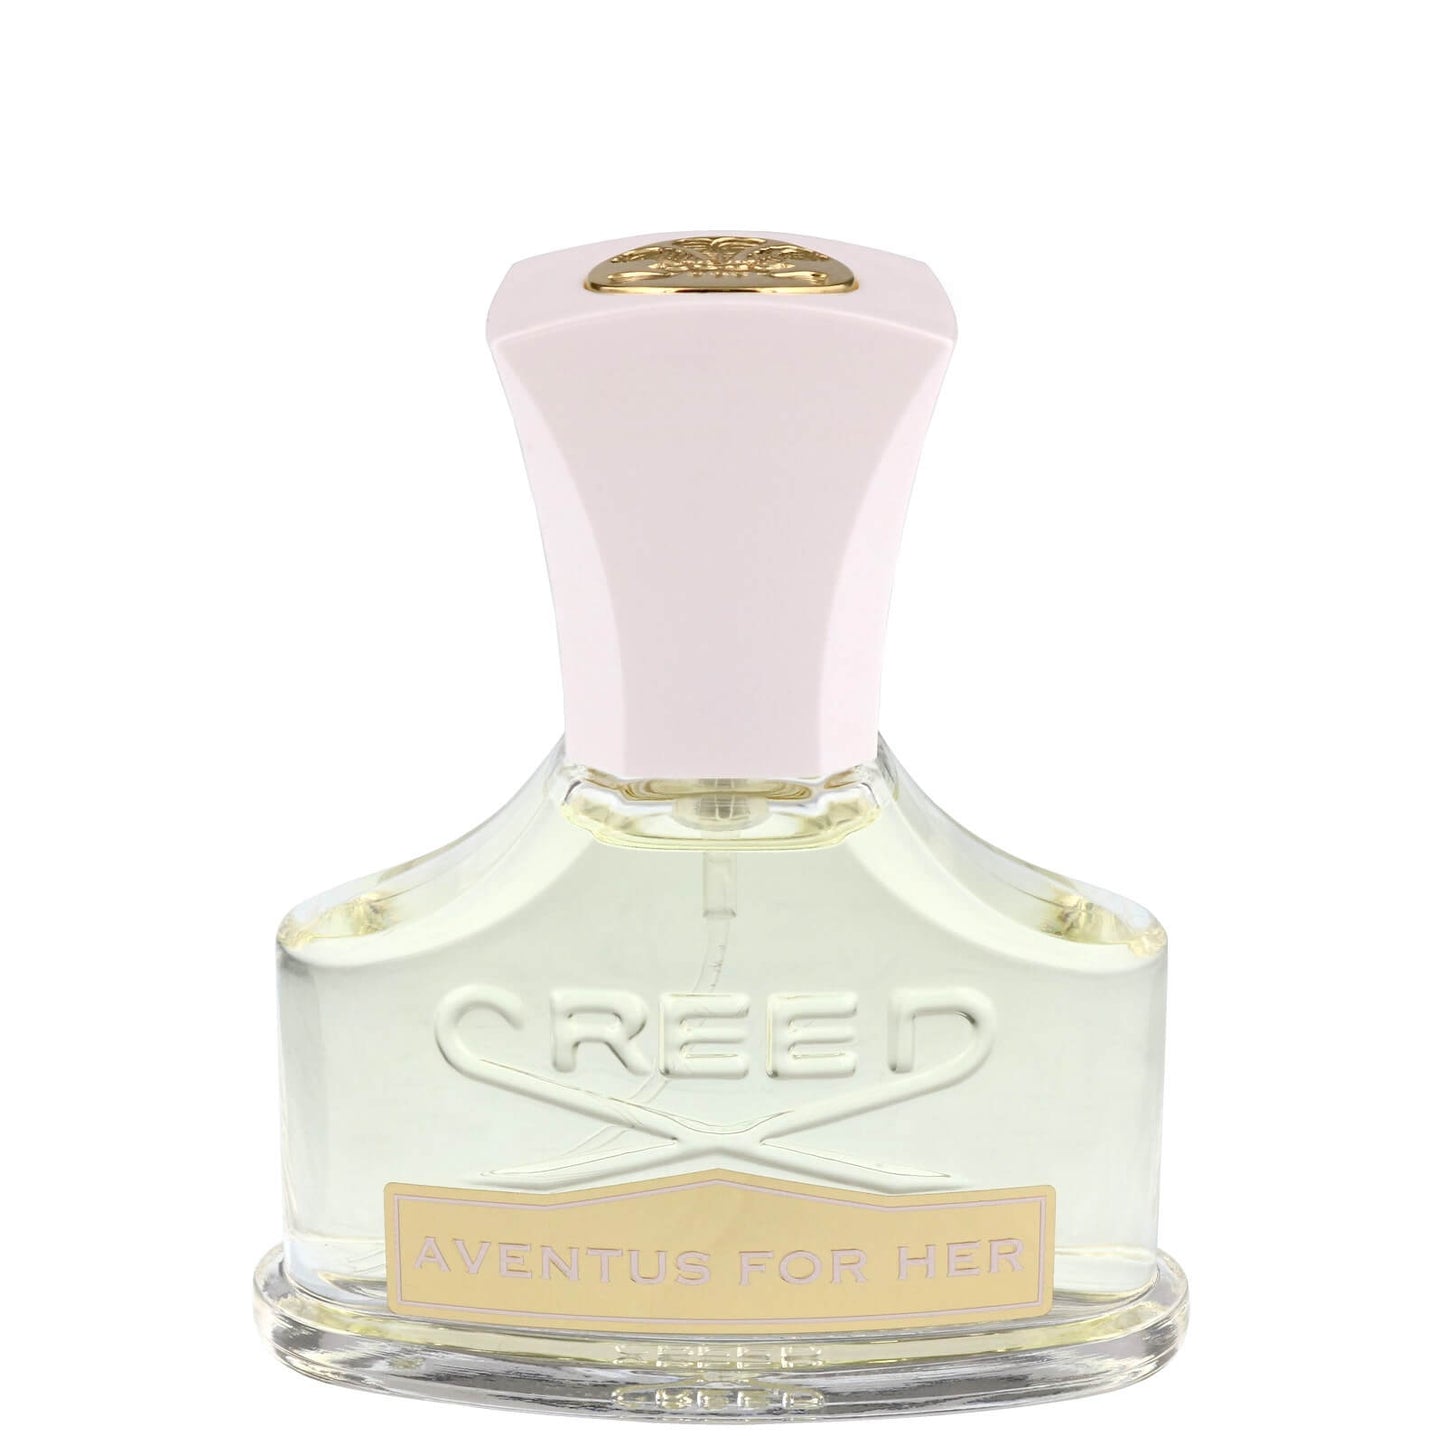 Creed - Aventus for Her - Pre order